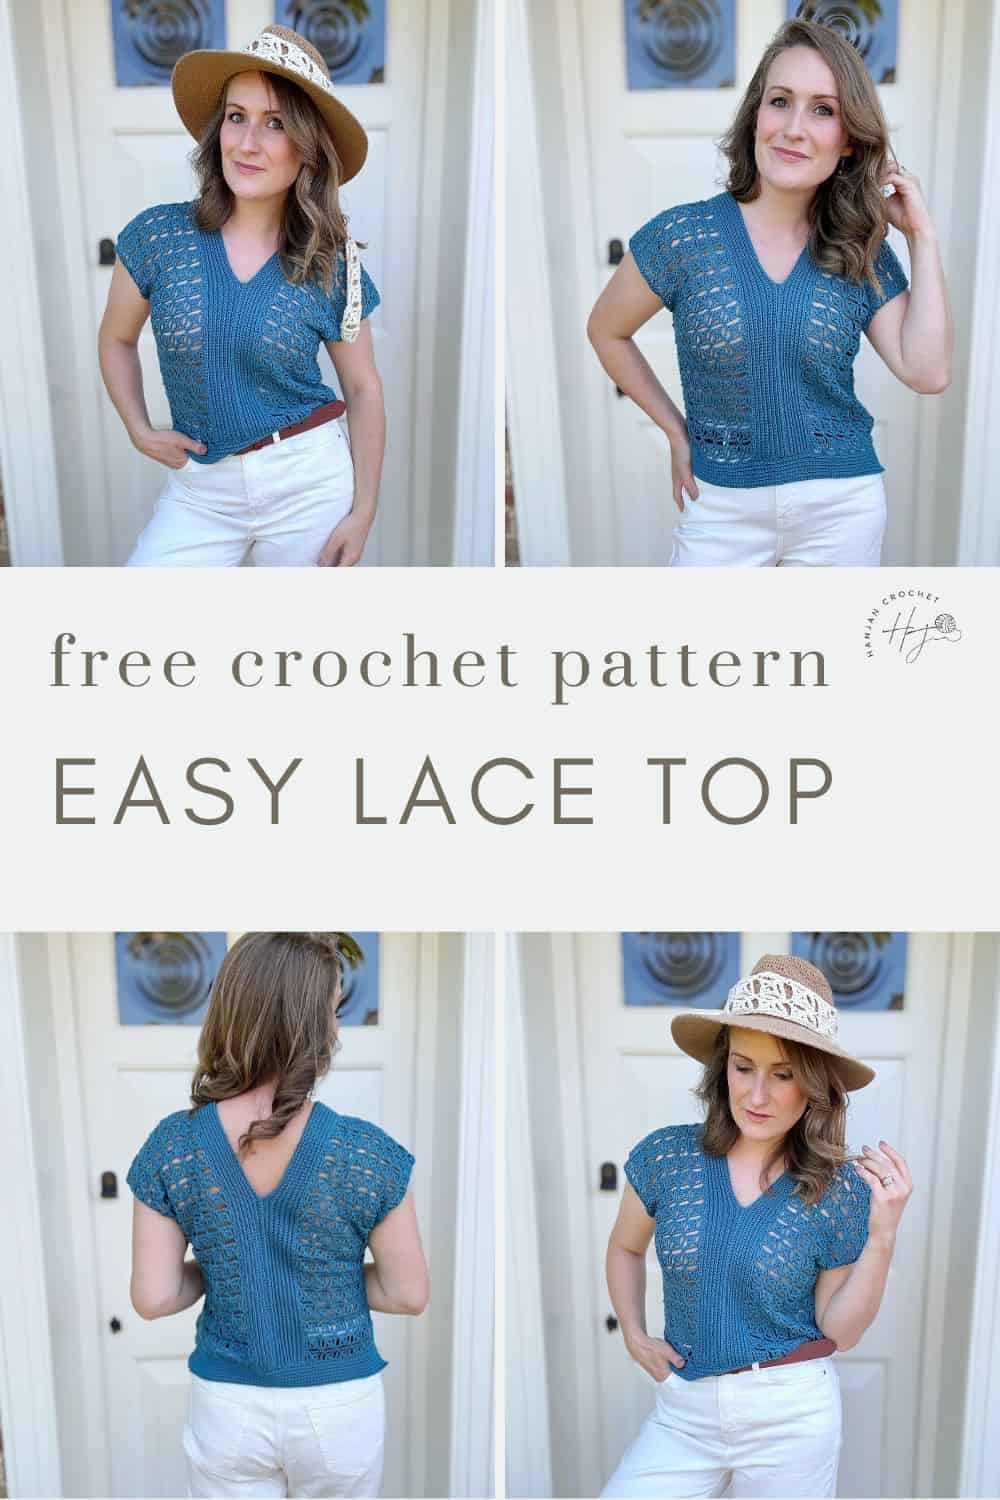 Collage of a woman modeling a blue, lace crochet top from different angles. Text reads, "Free crochet pattern, Easy Lace Top.